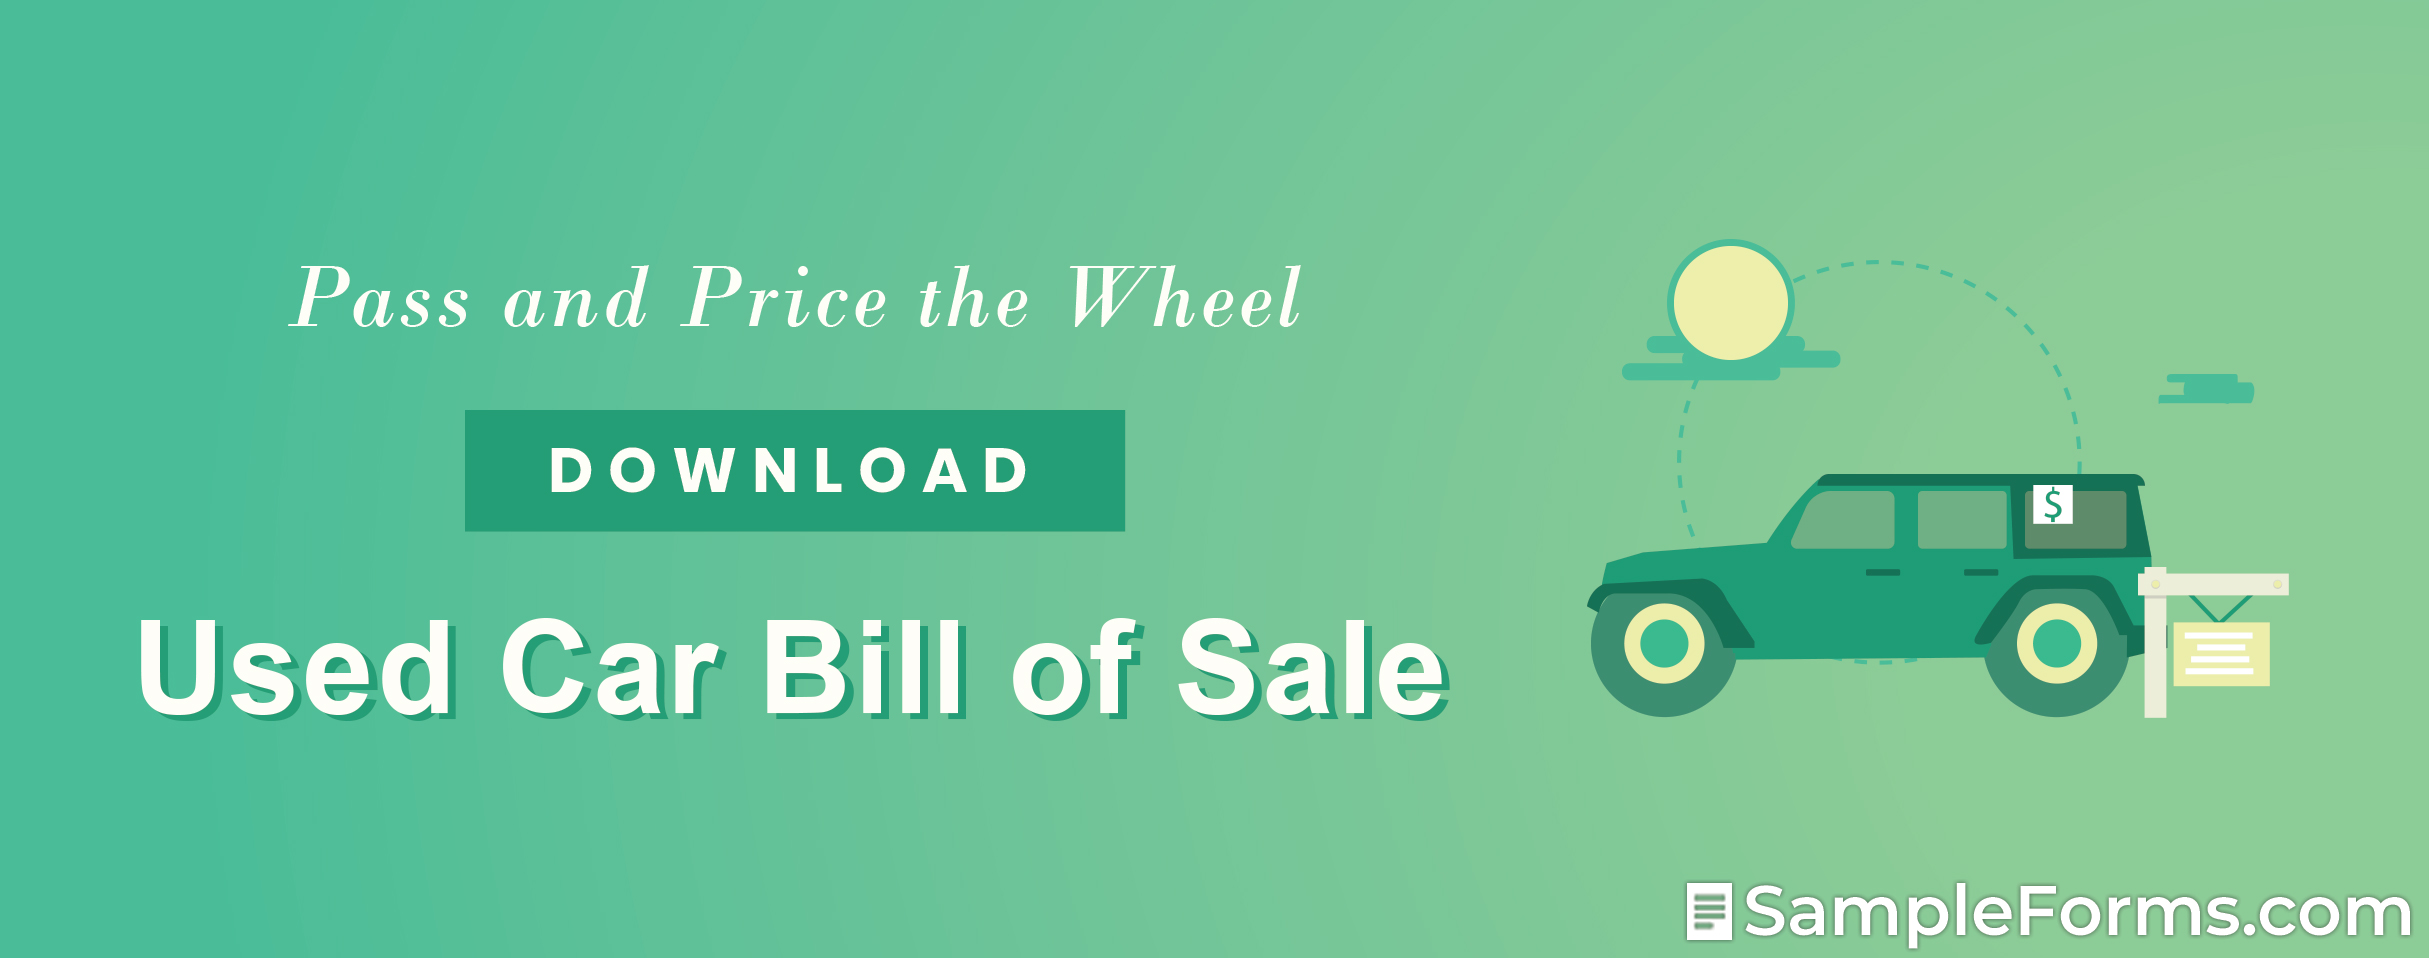 Used Car Bill of Sale Form